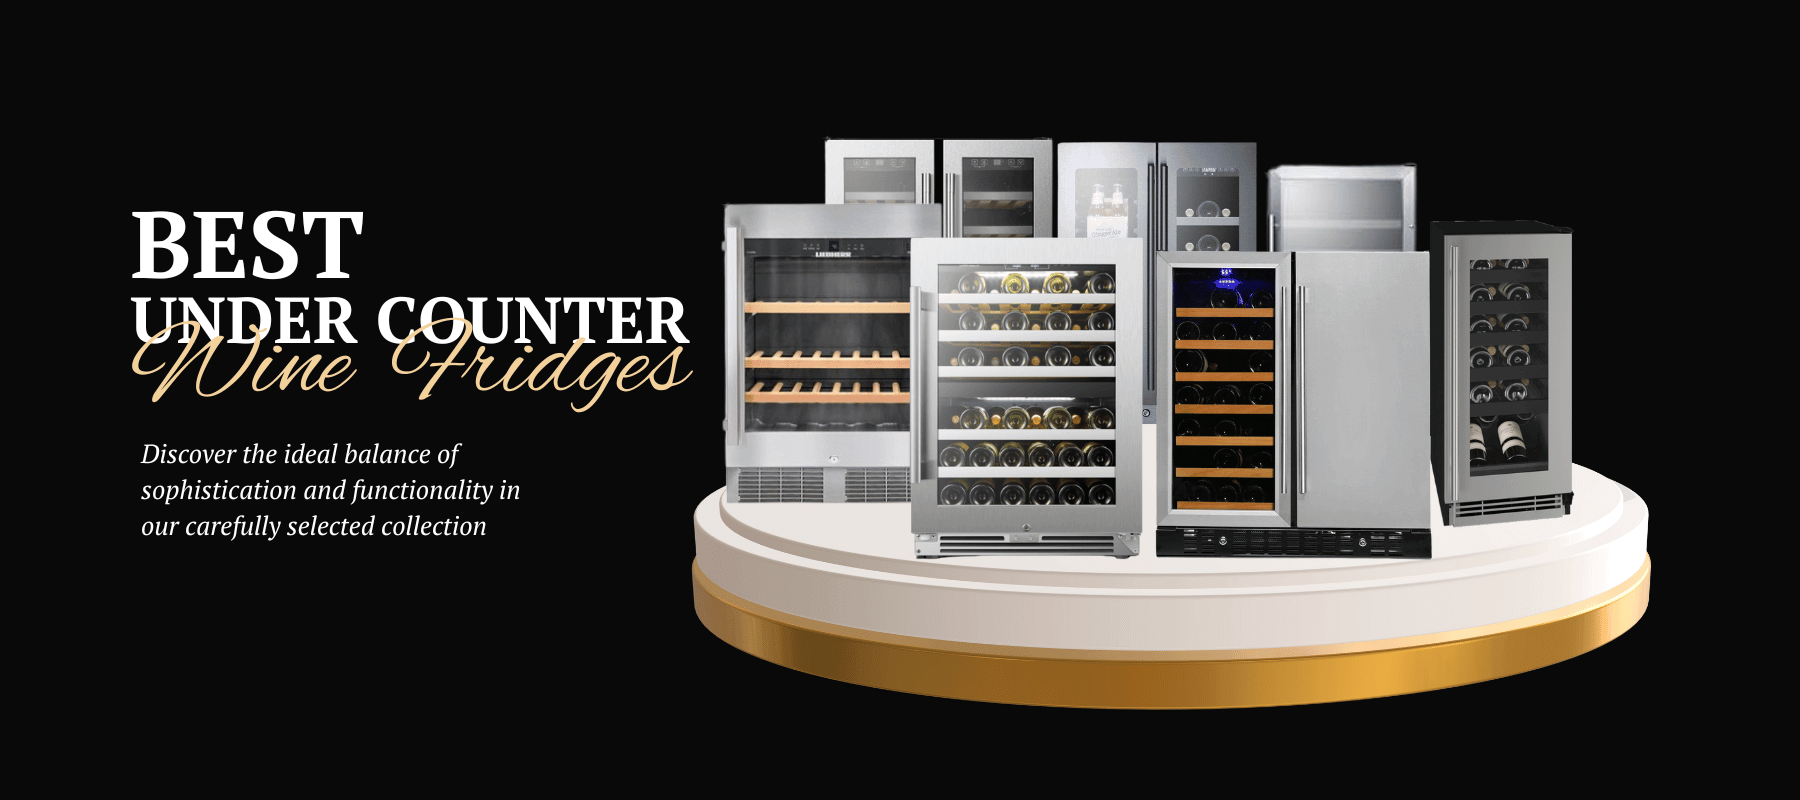 Elevate Your Home Entertaining with the Best Under Counter Wine Fridges